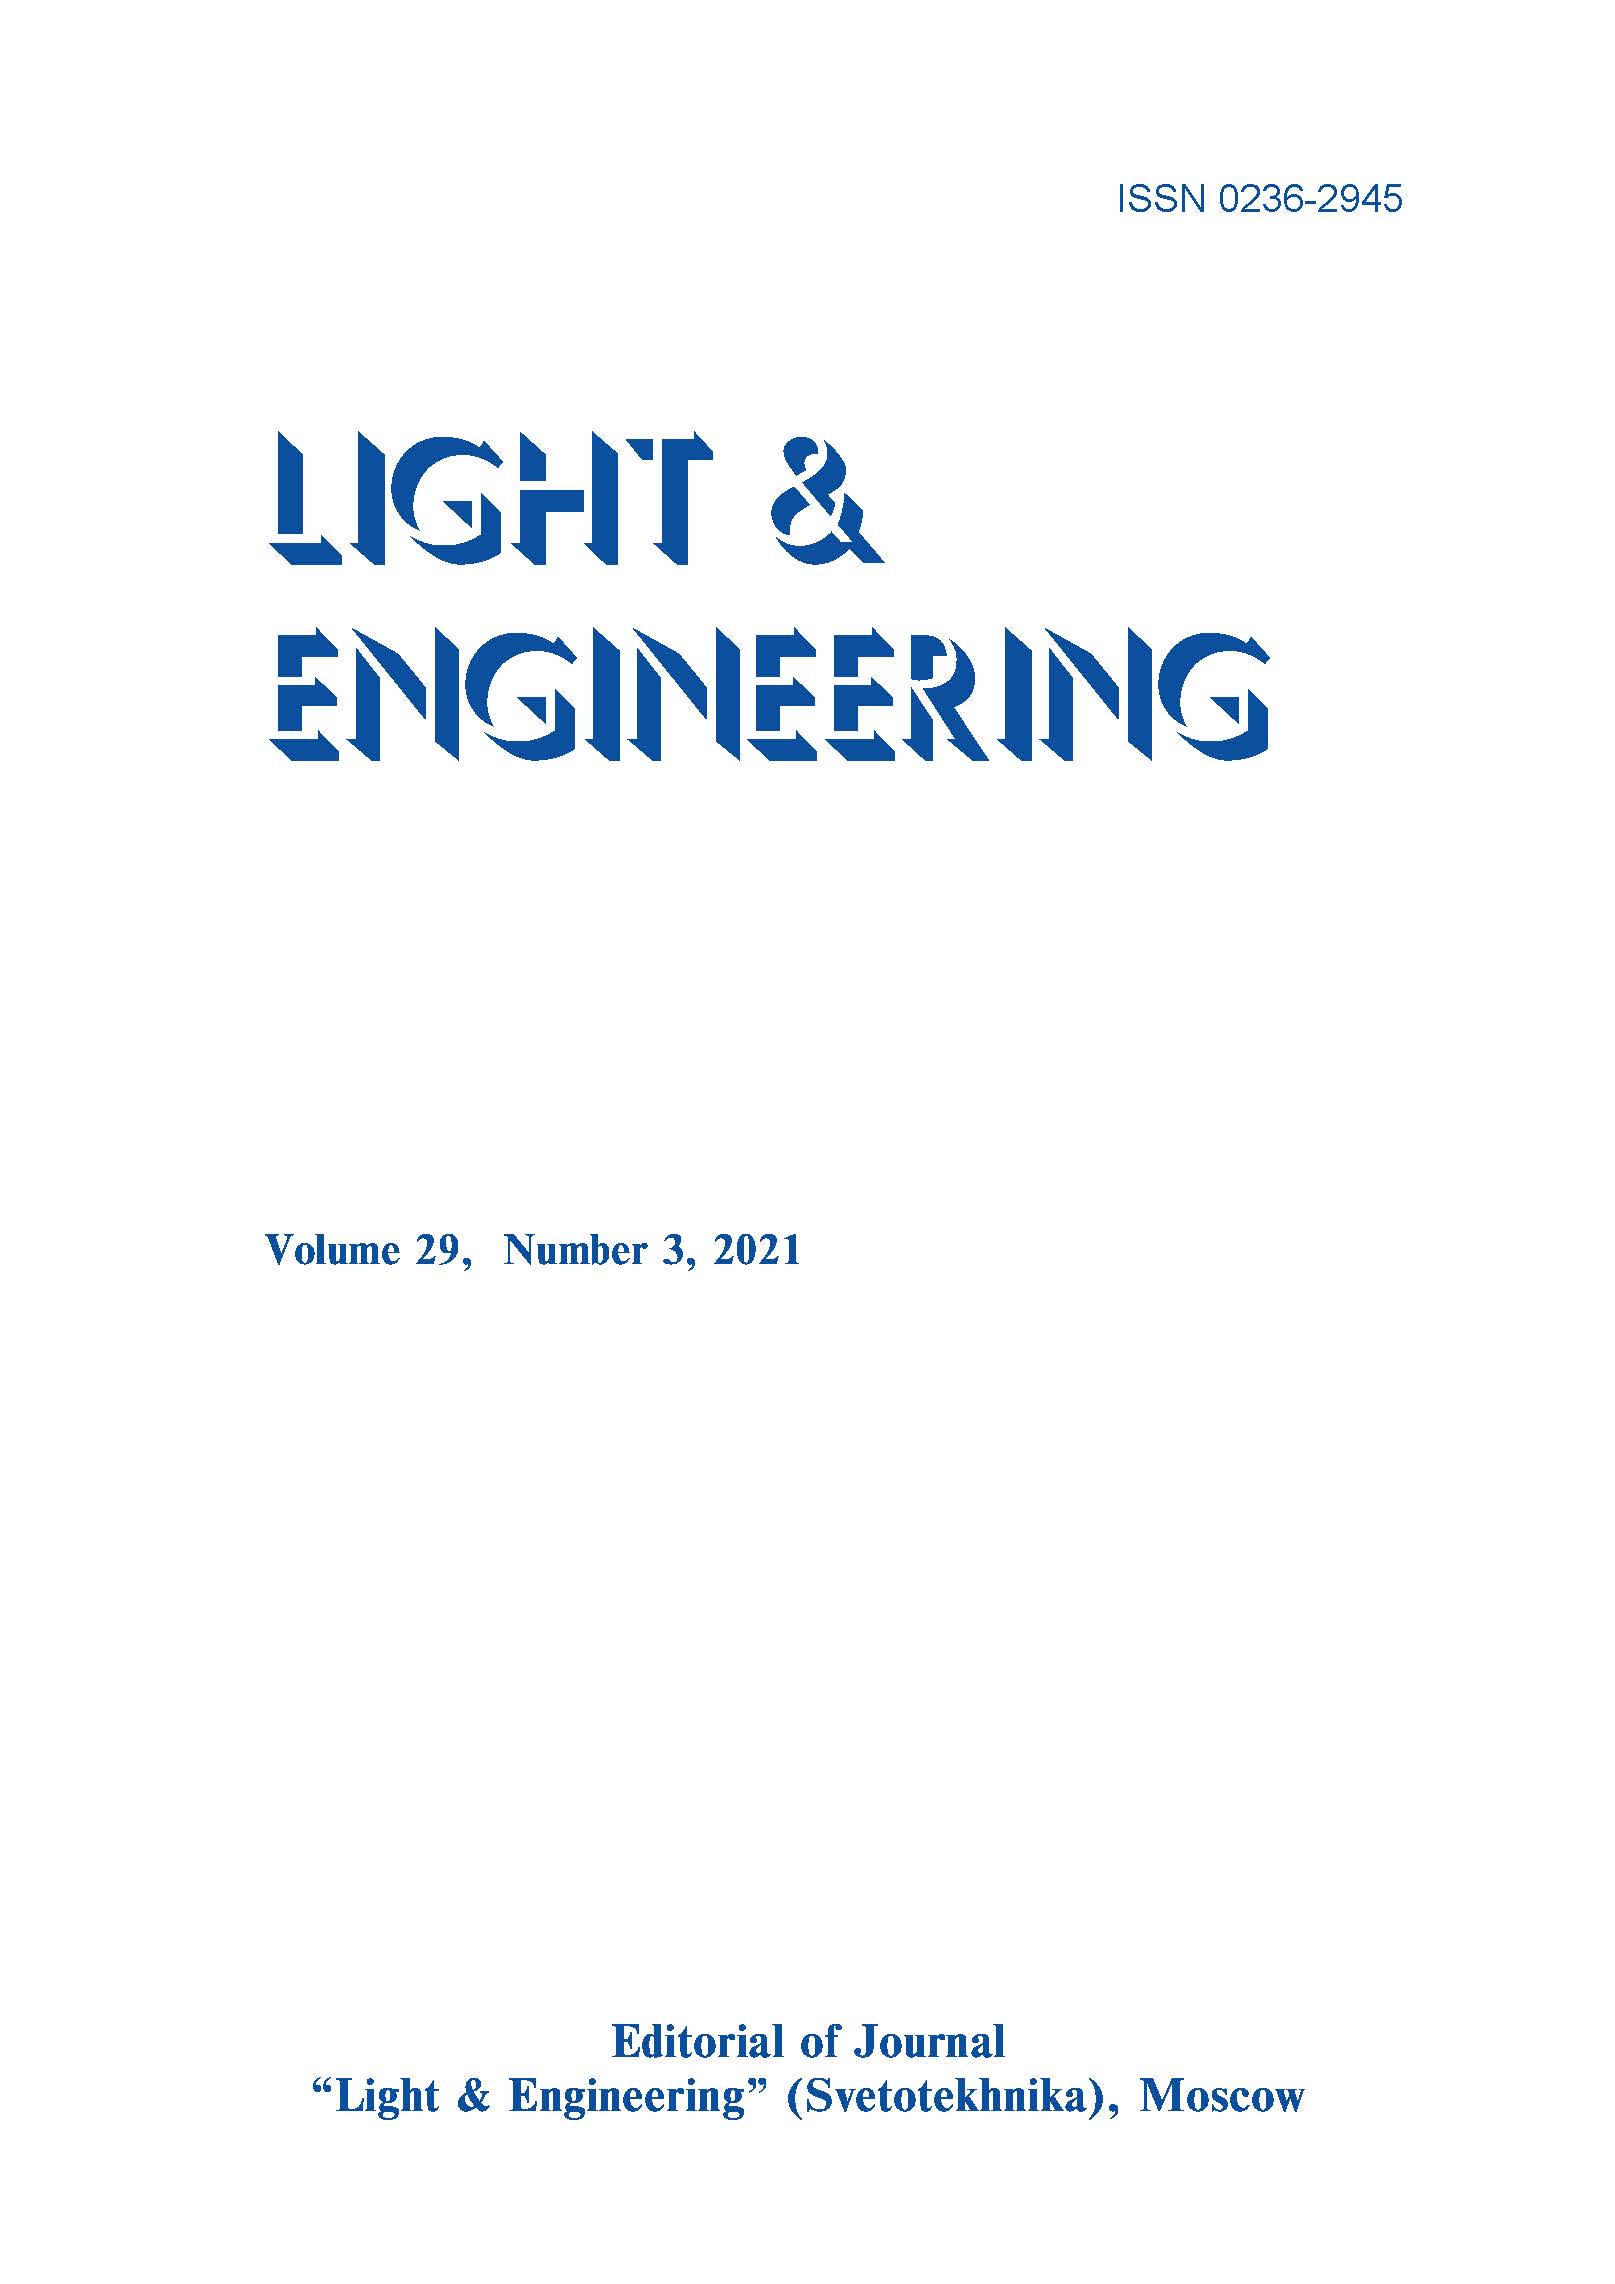 Introduction To The New Energy Efficient Class for Road Lighting In Indian Context L&E, Vol. 29, No. 3, 2021